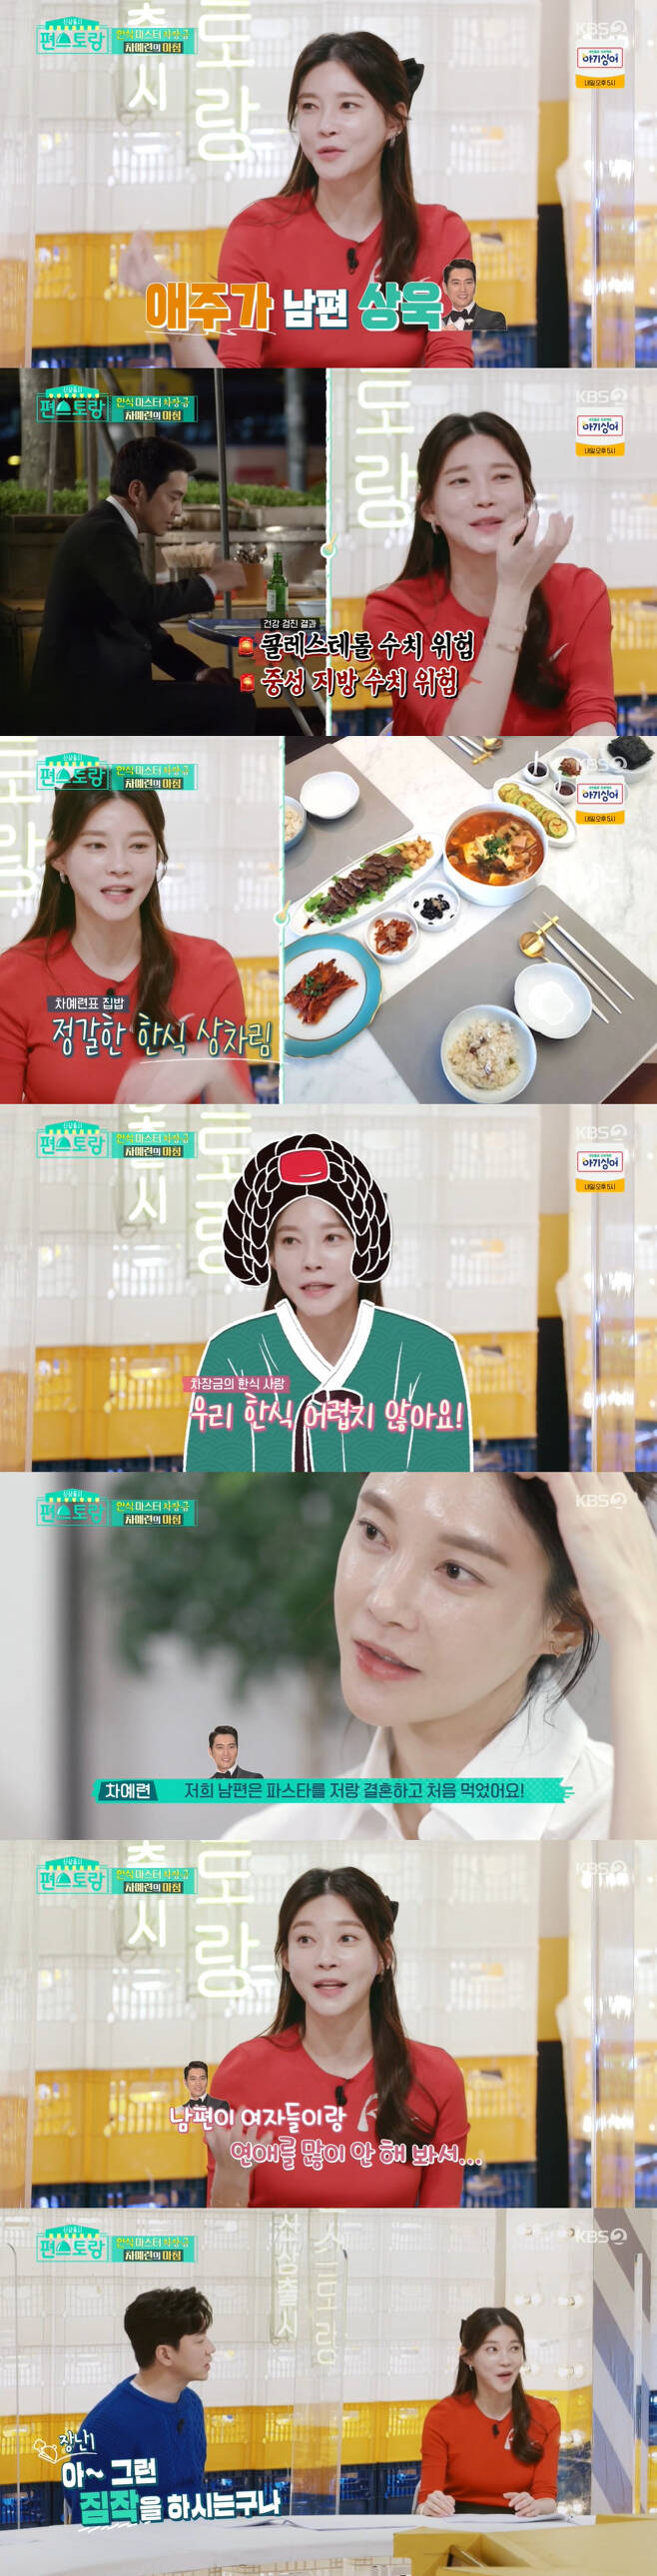 A sweet routine like the newlyweds of Cha Ye-ryun and Ju Sang Wook couple in their sixth year of marriage has been revealed.On the 25th KBS 2TV Stars Top Recipe at Fun-Staurant, the 39th menu development contest on the theme of Red Taste started, and Korean restaurant Cha Ye-ryun appeared as a new chef.Cha Ye-ryun, usually called Janggum-i, said, I usually eat at home because I have a husband and a child.It is a housewife who cooks rice, said Cha Ye-ryun.My husband cheered me a lot, and I came to appear with my husbands recommendation, he said. I cheered him up to win and come.Since then, Cha Ye-ryuns house with a neat interior has been unveiled, and Cha Ye-ryun, who opened his eyes early in the morning, headed straight to the kitchen.First, I prepared rice and kept the rice soup in a good way, and I attracted Eye-catching with steamed housewife Vibe.Cha Ye-ryun then quickly prepared the Kang miso and kale ssambap; Cha Ye-ryun said: My husband likes to drink.I like to drink soju in soju and pork belly in giblets. I tested it and said that cholesterol levels are high and neutral protein levels are high.I do not eat green vegetables, I die. It was my wifes diet to feed vegetables.The second menu was a simple shellfish spinach miso soup. Cha Ye-ryun said, I am really easy to eat Korean food. Family food is a finished Korean food. My husband married pasta and ate it for the first time.I went out with a goon, pork belly, and stew, he recalled. I think now that I did not have a lot of love with women, so I did not go to drink with my boyfriends. Then Jung Sang-hoon laughed, saying, You have such a guess.Thats when husband Ju Sang Wook appeared with his 5-year-old daughter, Cha Ye-ryun, laughing, Its six years of marriage, Ive lived long.Cha Ye-ryun and Ju Sang Book developed into lovers, appearing together in the 2015 drama Gorgeous Temptation.Ju Sang Wook and his daughter helped his mother Cha Ye-ryun prepare for breakfast, and in this process Ju Sang Wook attracted Eye-catching as a lover husband who listened to his wifes request.After that, her husband and daughters customized meal was completed, Ju Sang Wook praised It is delicious. No one cooks like this at home. Thank you. Kimchi is really delicious.At that time, Cha Ye-ryun asked, Idea is different. So Ju Sang Book was worried about the menu together, and the message he exchanged with Cha Ye-ryun was released afterwards.In the process, MCs were surprised by the heart-breeding message: I lived early in my life with my family.I wanted to get married quickly, he said. I was so happy to eat with my family who bought delicious food, so I was able to eat. Since then, Cha Ye-ryun has attracted Eye-catching with Some Like It Hot, which makes a milky kit for her husband, who has a lot of peanut butter octopus fried, green tea-hot chicken skewers, and a provision shoot.Jung Sang-hoon also prepared a Gwangju-style oritang for the pregnant gag woman Lee Su-ji, I want to eat something big.The cast of Oritang, which is filled with some Like It Hot, dropped the ducks boiled well in the wild dog juice, and the cast admired it as delicious.Then, I made a side dish for Lee Su-ji until the old oil and miso armed Achievement.Lee Su-ji, who met Jung Sang-hoon shortly after, was impressed by I am like a mother.Lee Young-ja and Aiki went on a red taste tour of Eunpyeong-gu.At that time Aiki presented a dance prepared for the dance crew Hook (HOOK) and Stars Top Recipe at Fun-Staurant, and Lee Young-ja said, Its great.The standing ovation comes out, he said, jumping up from his seat and applauding.Aiki said: My father is a chef, my father prepared the marinated crab he dipped himself.I had to bring it to my hometown Dangjin for 4 hours the day before, he said.Lee Young-ja started eating marinated crab with white rice on the spot.Aiki and Hook members who became intuitive about the wonderful food of Lee Young-ja, the mother of the food, were surprised.Lee Young-ja and Aiki went to the Yeonseo market to taste cauldron tteokbokki and red fish cake, and they poured out admiration for the taste of luxury tteokbokki.